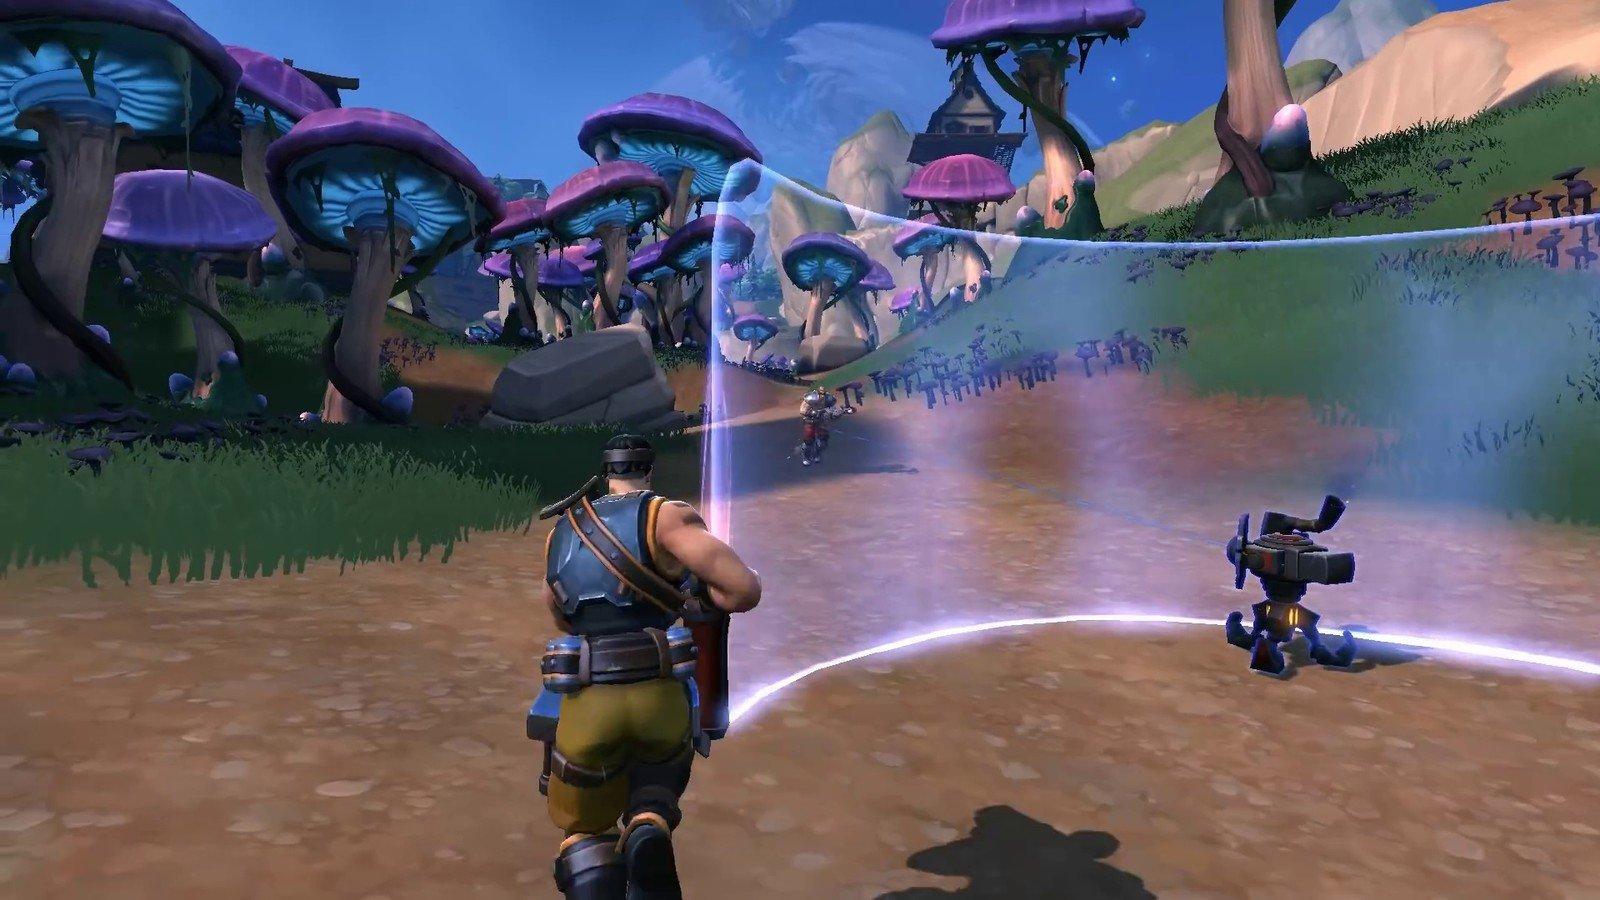 Cross Play Between Xbox One And Nintendo Switch Coming To Paladins